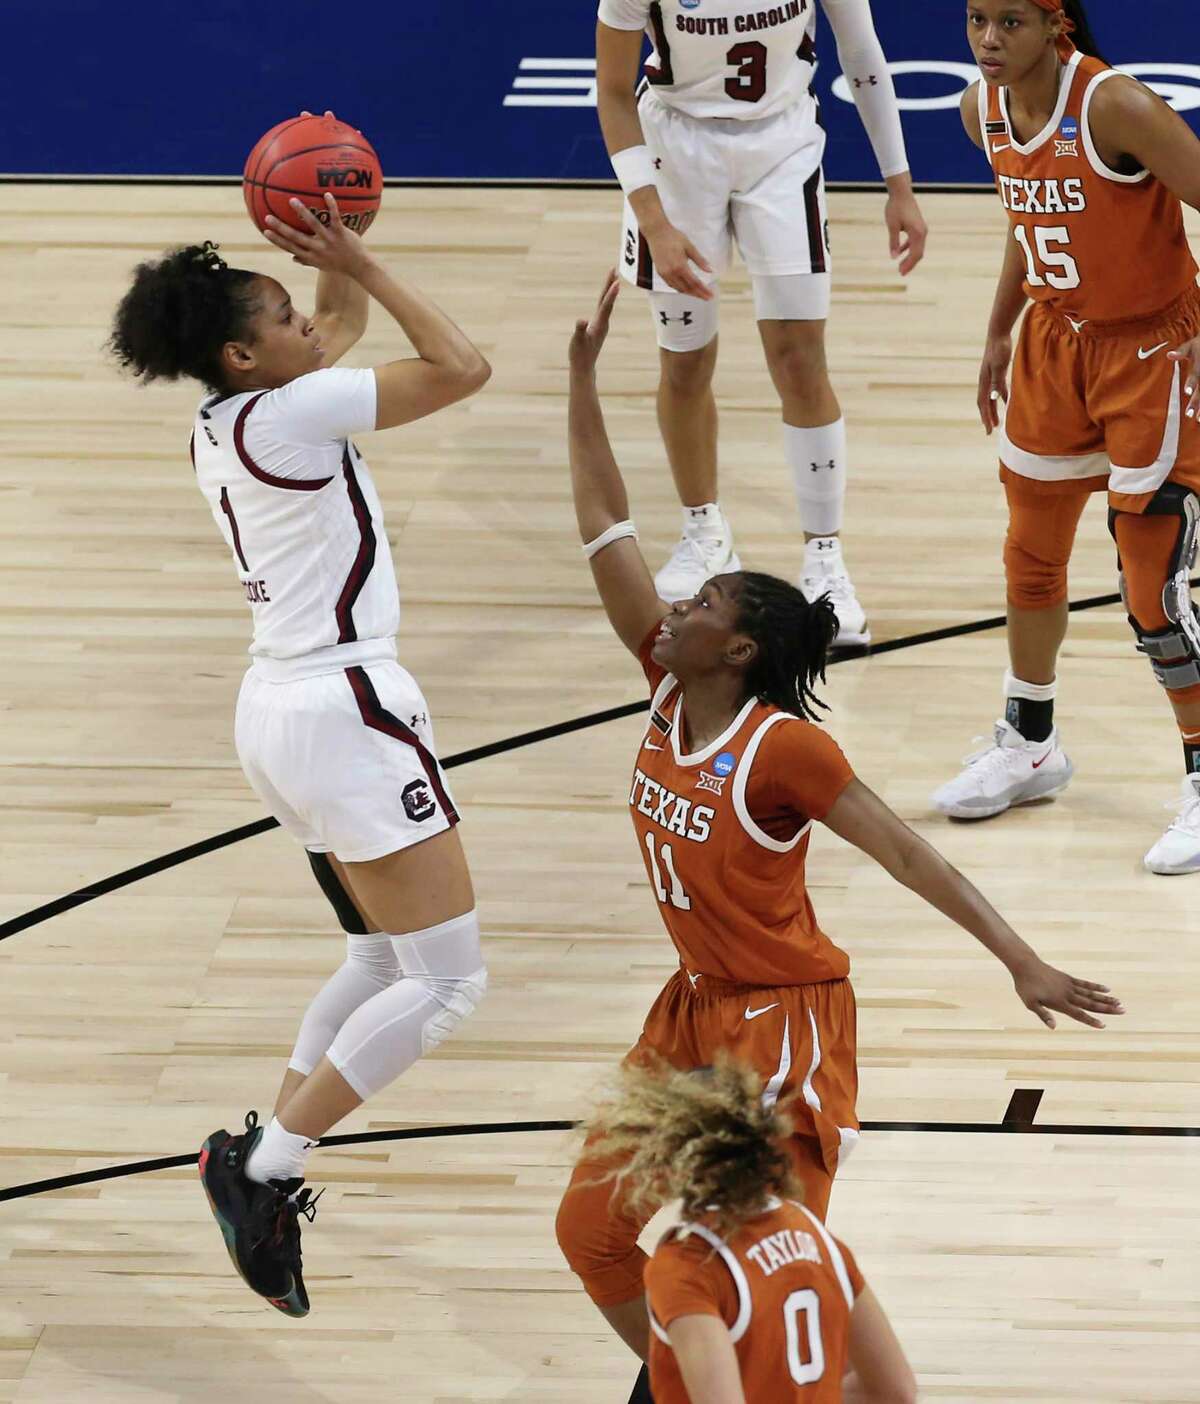 South Carolina’s Zia Cooke (01) scores over Texas’ Joanne Allen-Taylor (11) during their Elite Eight regional championship game of the 2021 NCAA Women’s Basketball tournament at the Alamodome on Tuesday, Mar. 30, 2021.